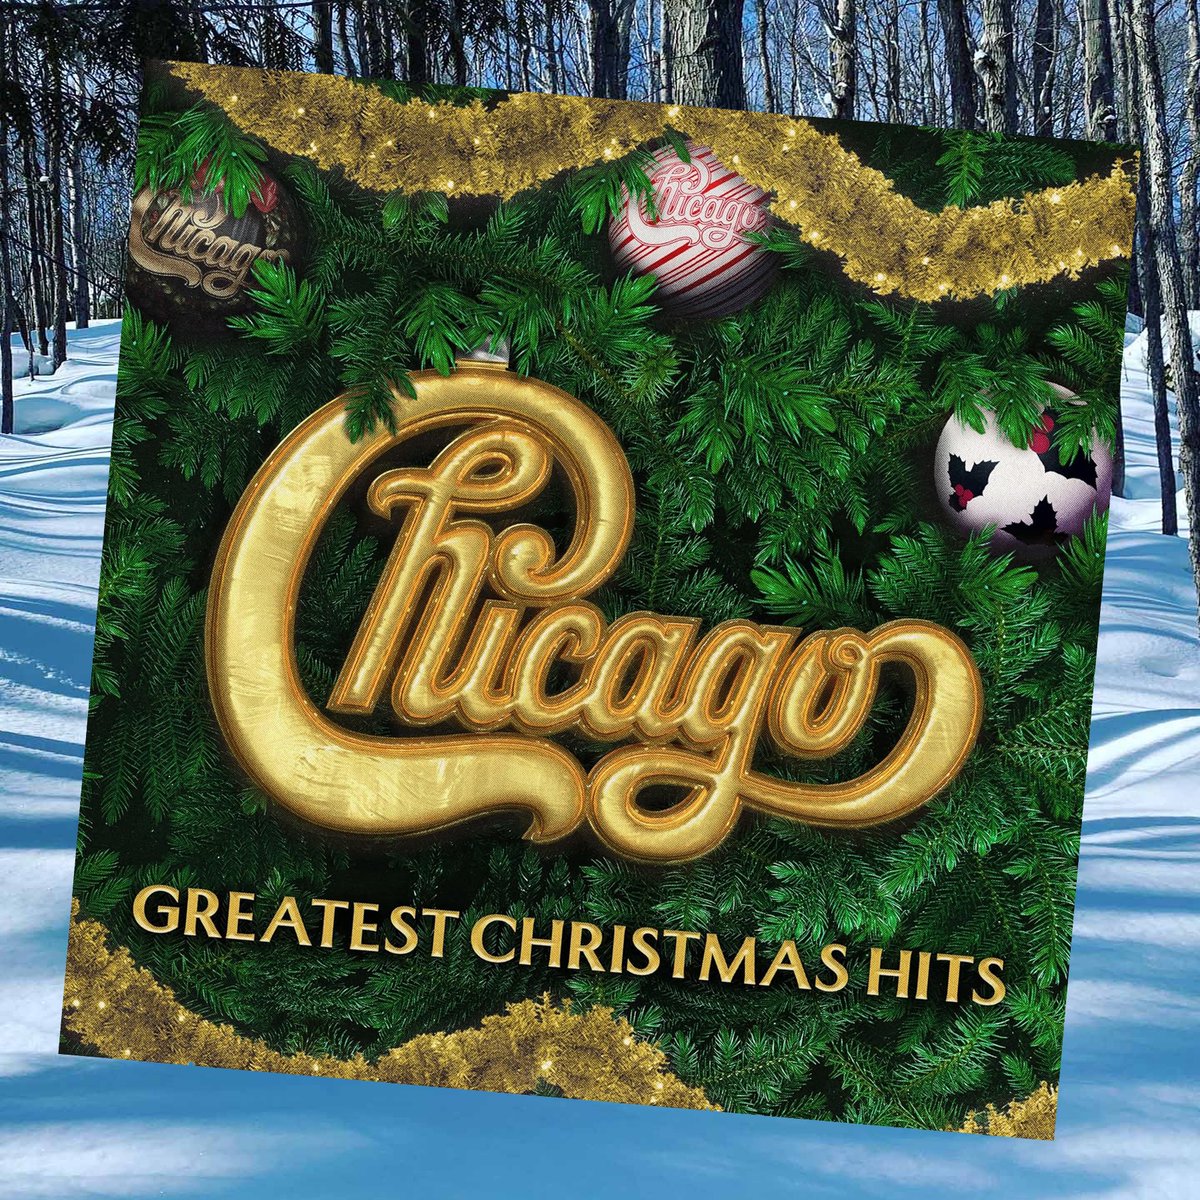 ’Tisn’t the season just yet, but the news is now official: The second track on the forthcoming @chicagotheband Greatest Christmas Hits collection on @Rhino_Records will be “All Over The World,” a song Neil Donell and I co-wrote for the band’s 2019 Christmas album! #surreal